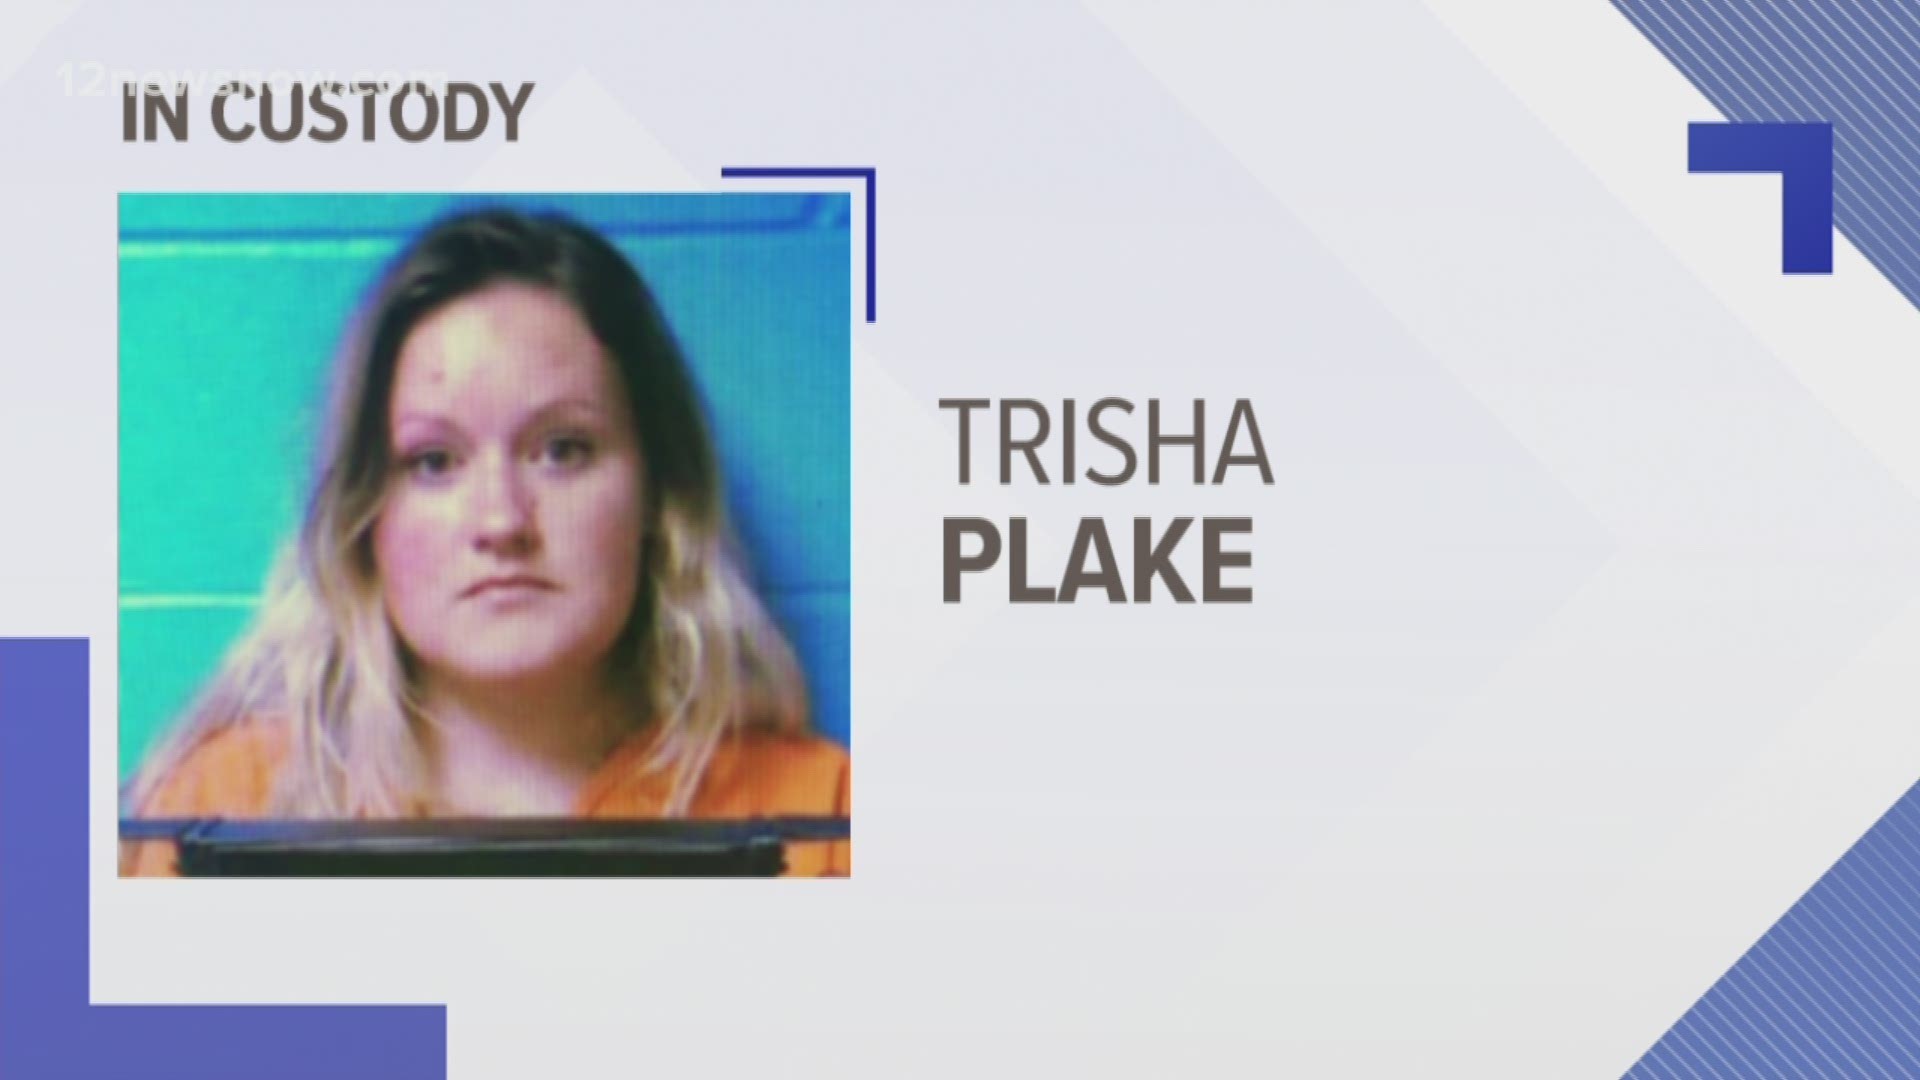 Police determined the mother, Trisha Plake, went into the father’s place of residence to take their 3-year-old child without consent.